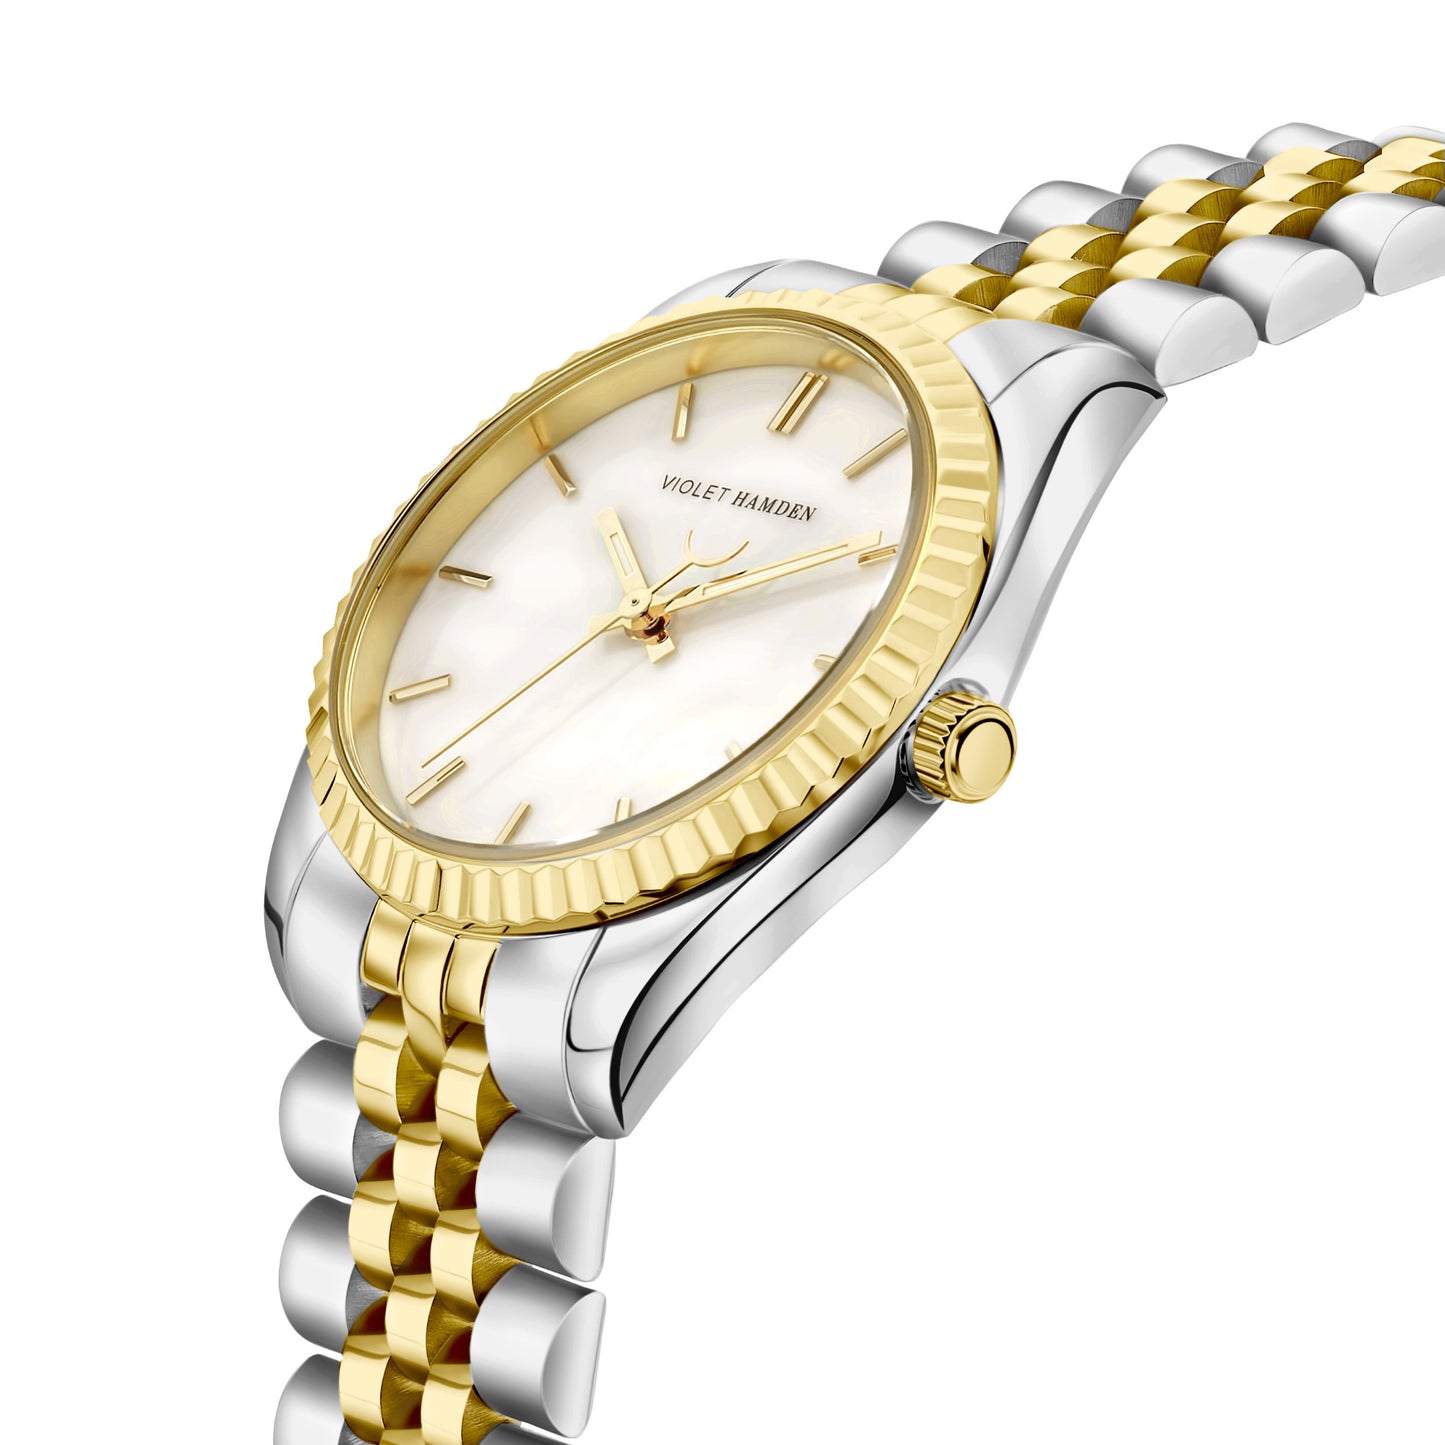 Sunrise round ladies watch gold and silver coloured and mother of pearl